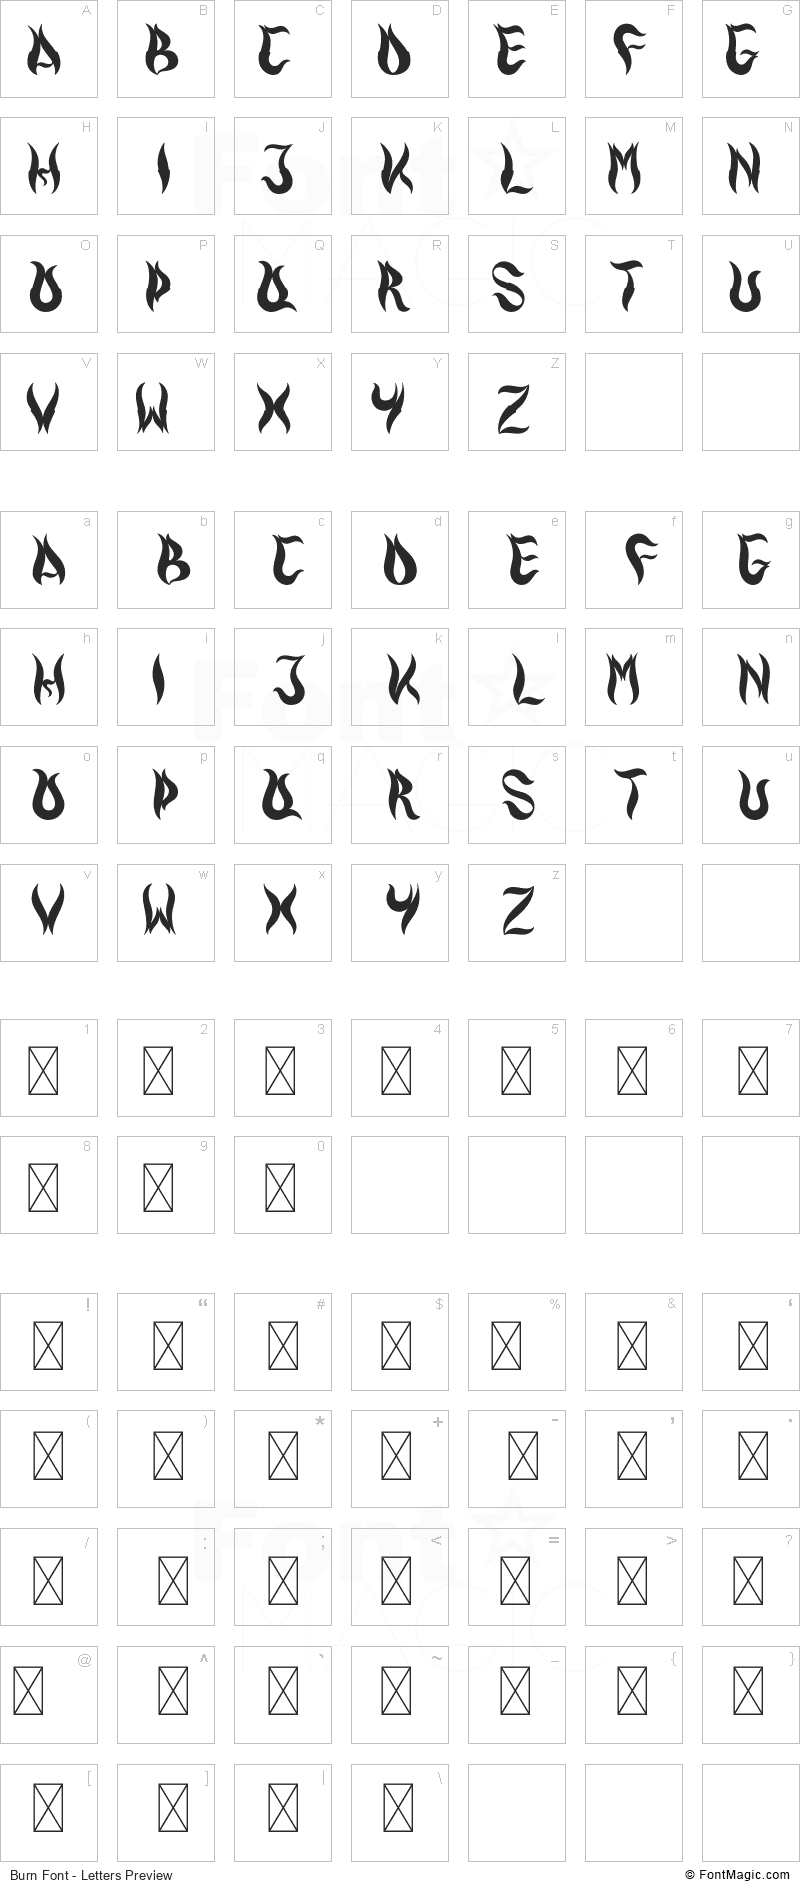 Burn Font - All Latters Preview Chart